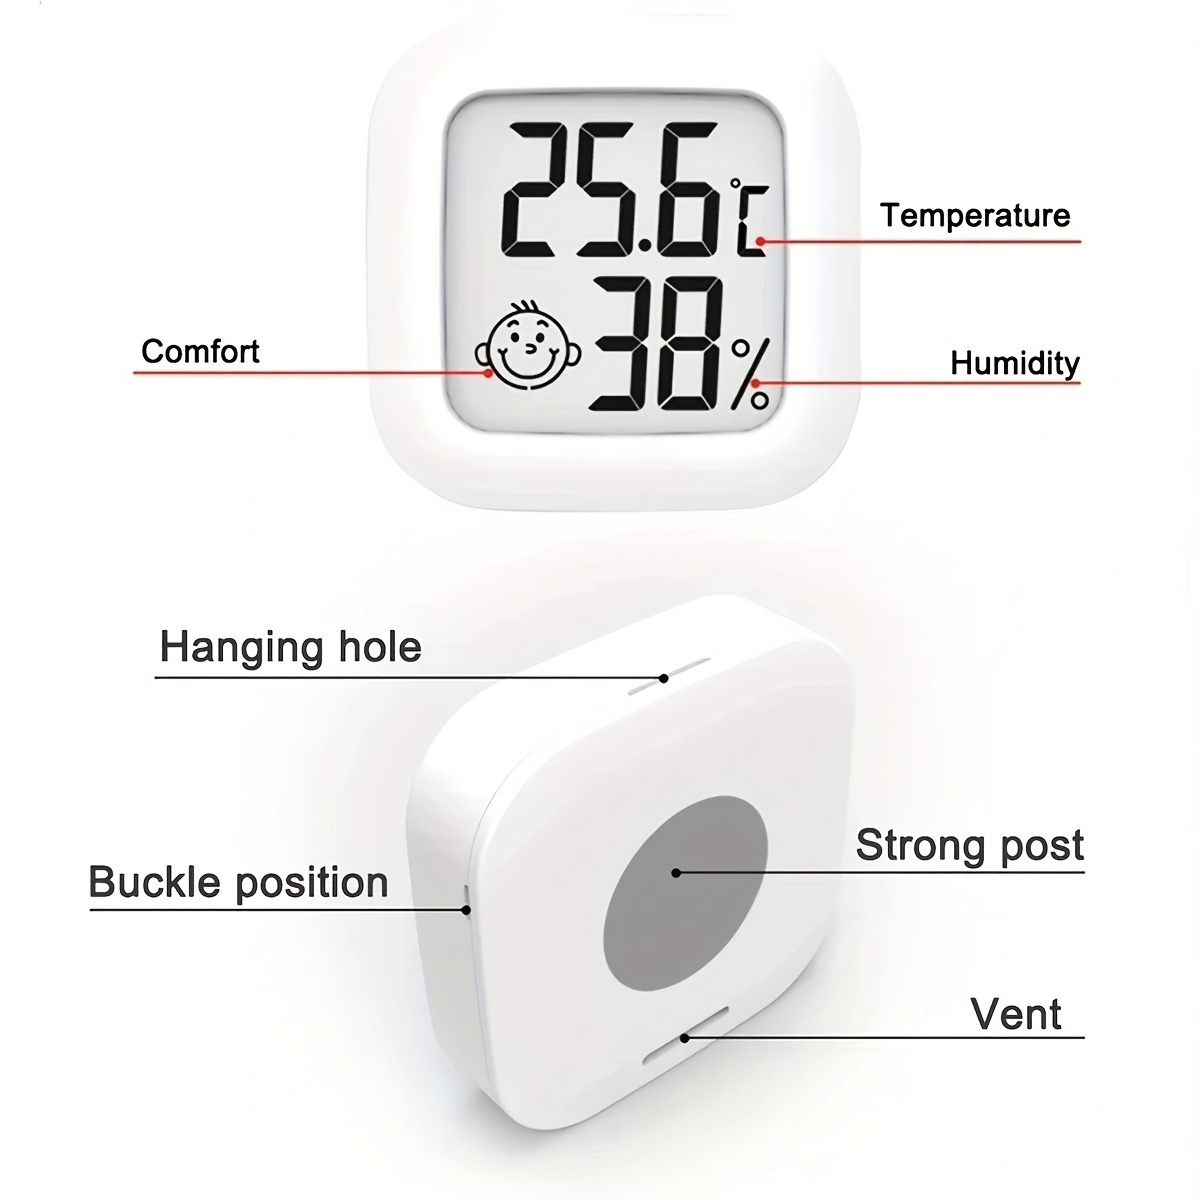 LCD Digital Thermometer Hygrometer Home Indoor Temperature